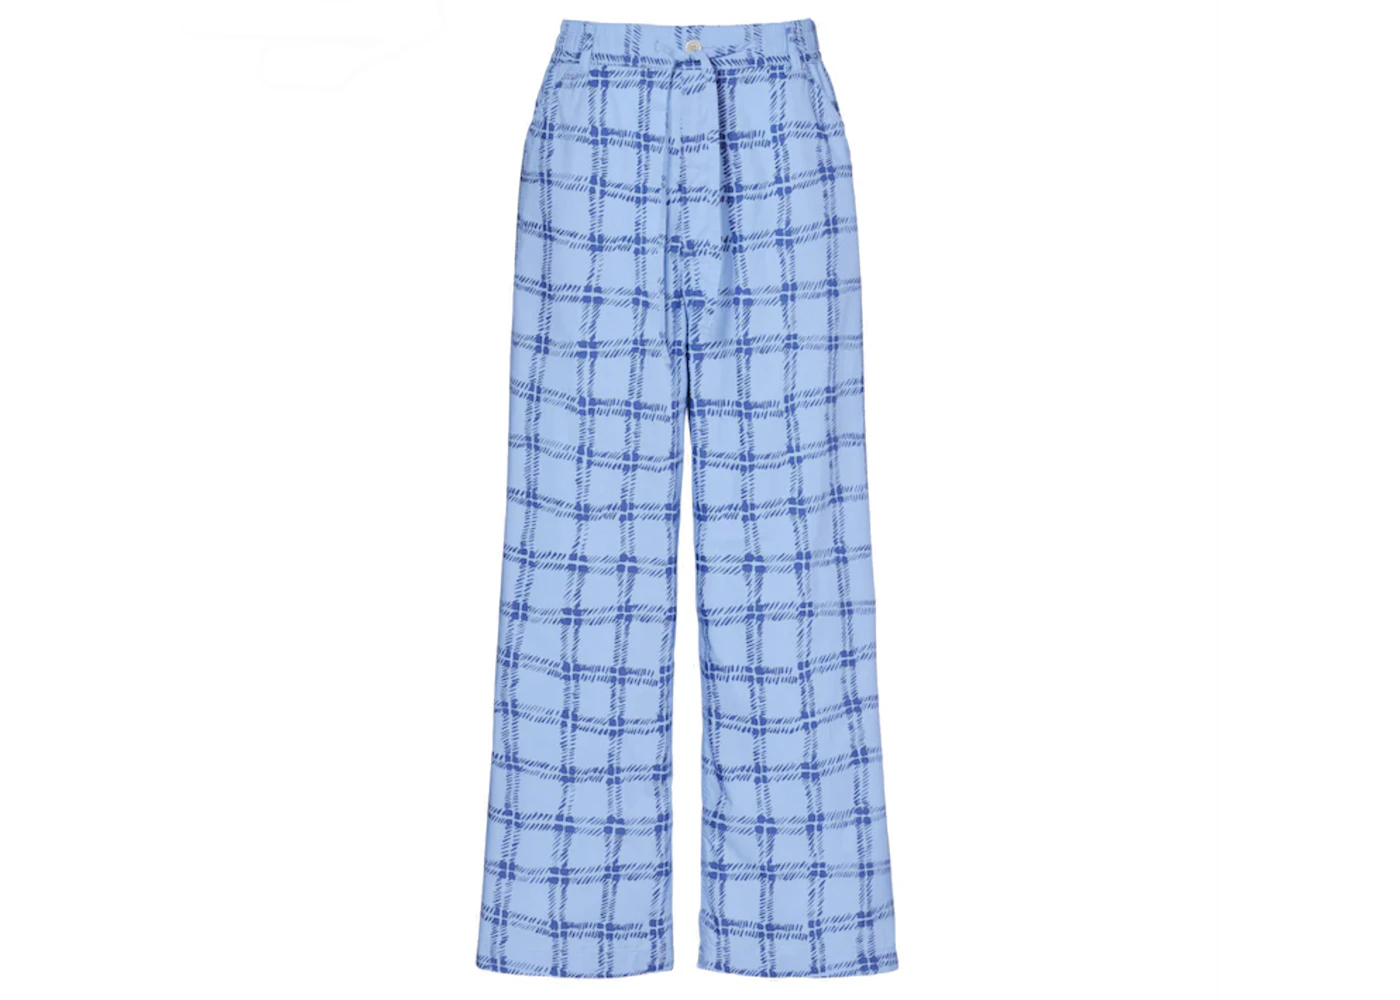 Uniqlo x MARNI Easy Wide Fit Check Pants (Asia Sizing) Blue Men's ...